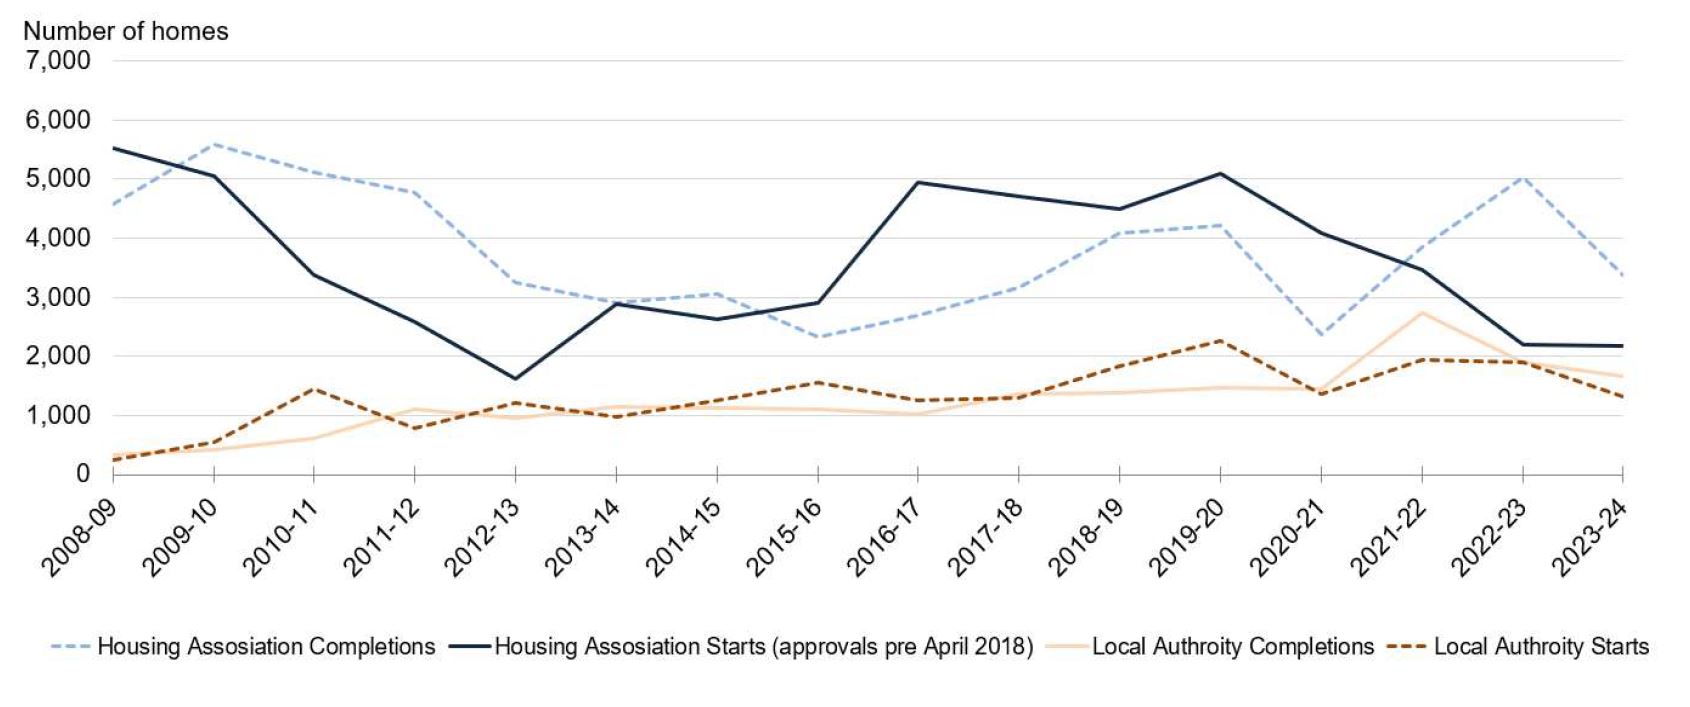 This chart shows local authority and housing association starts and completions in Scotland from 2008-09 to 2023-24